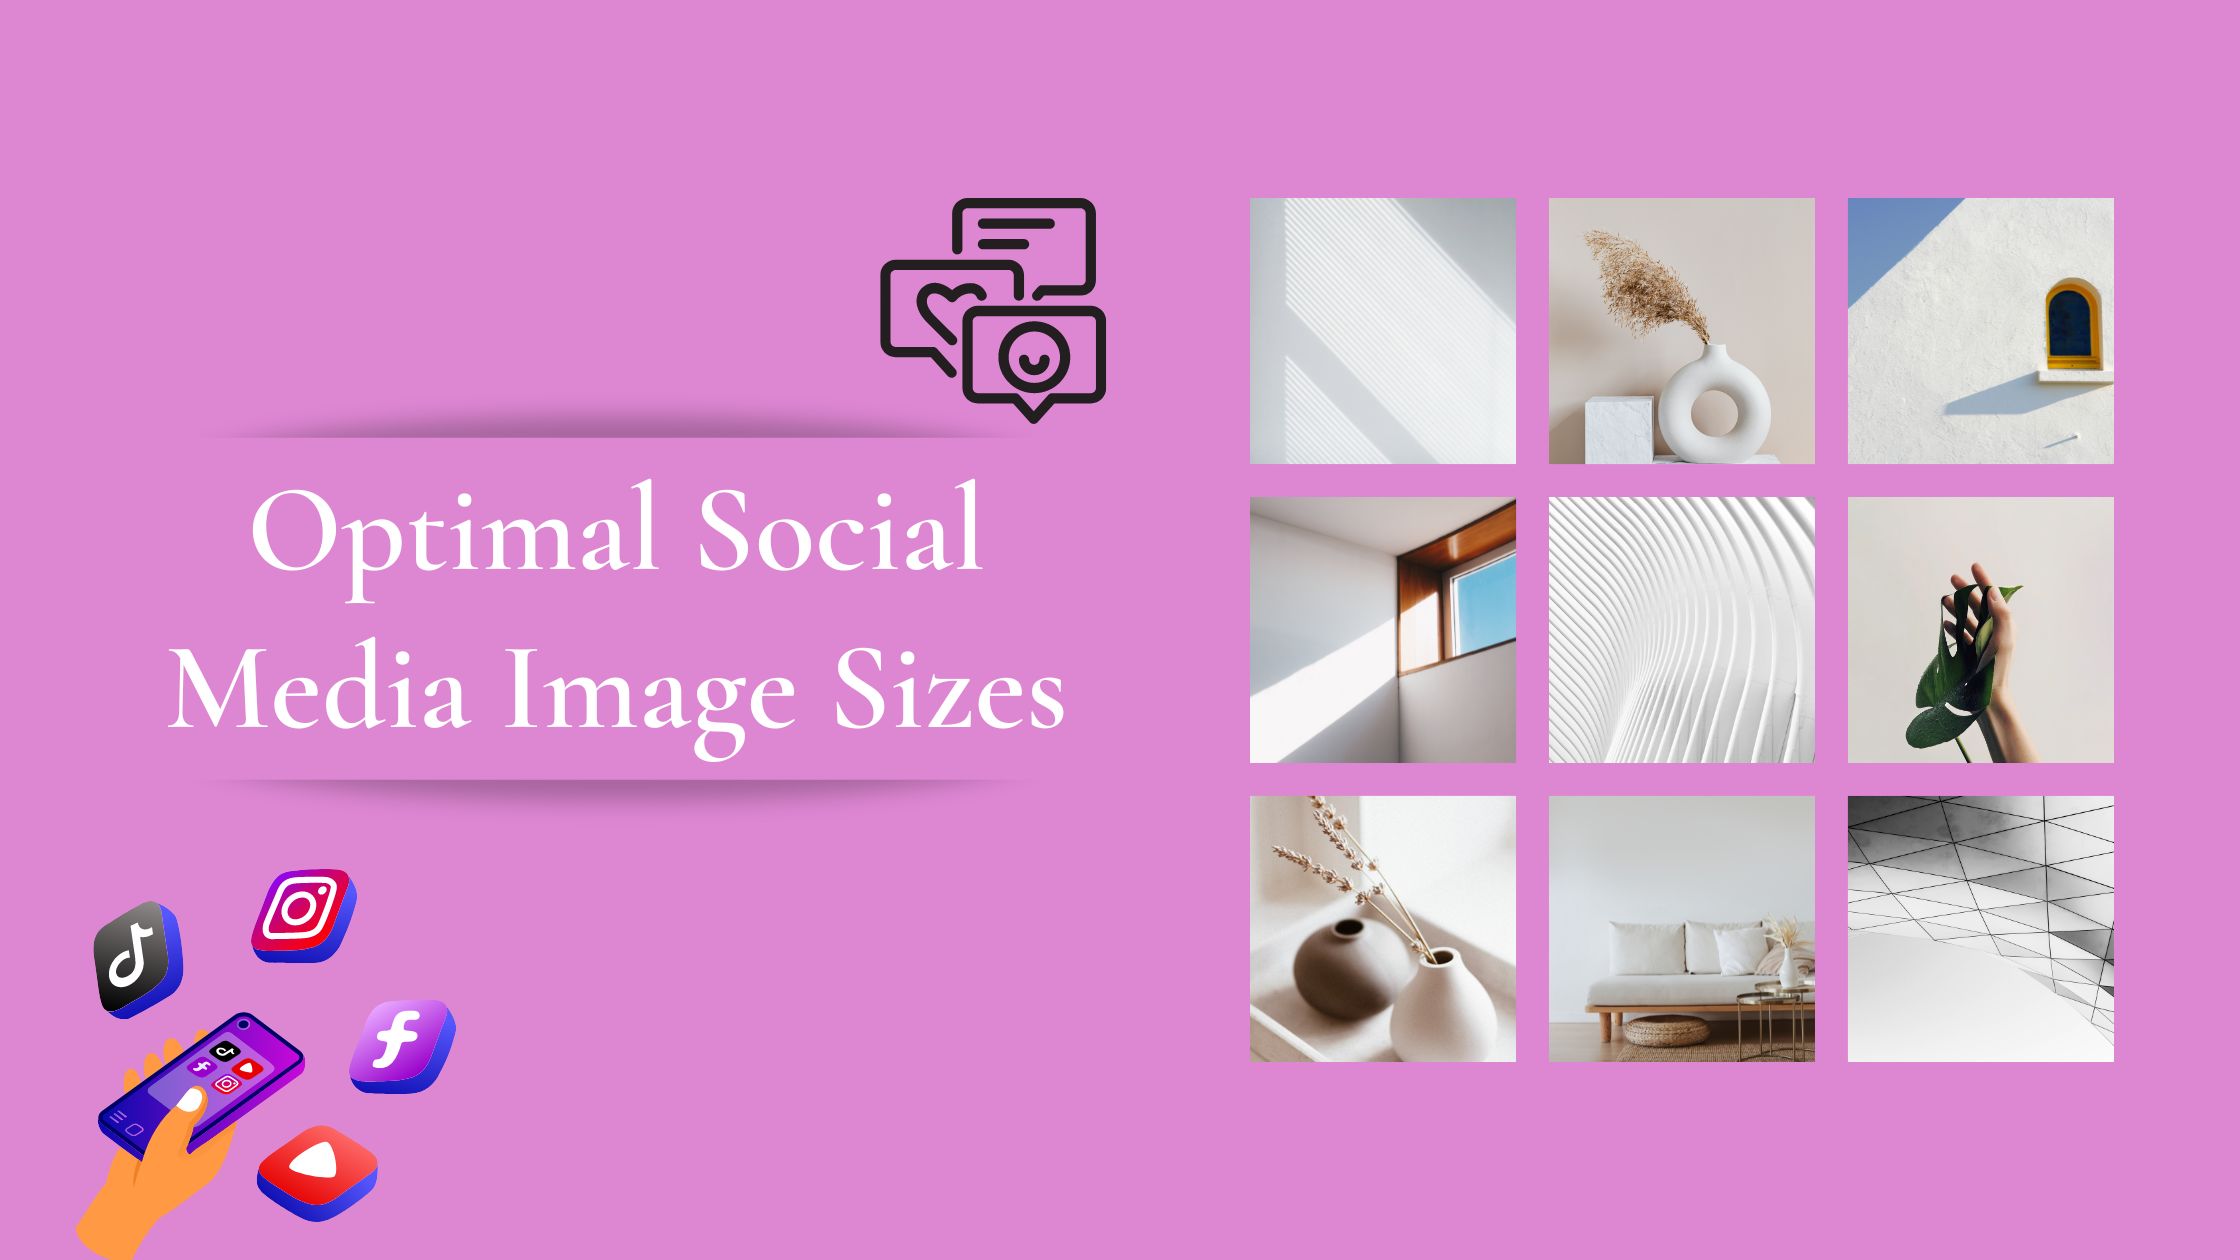 You are currently viewing What are Optimal Social Media Image Sizes?